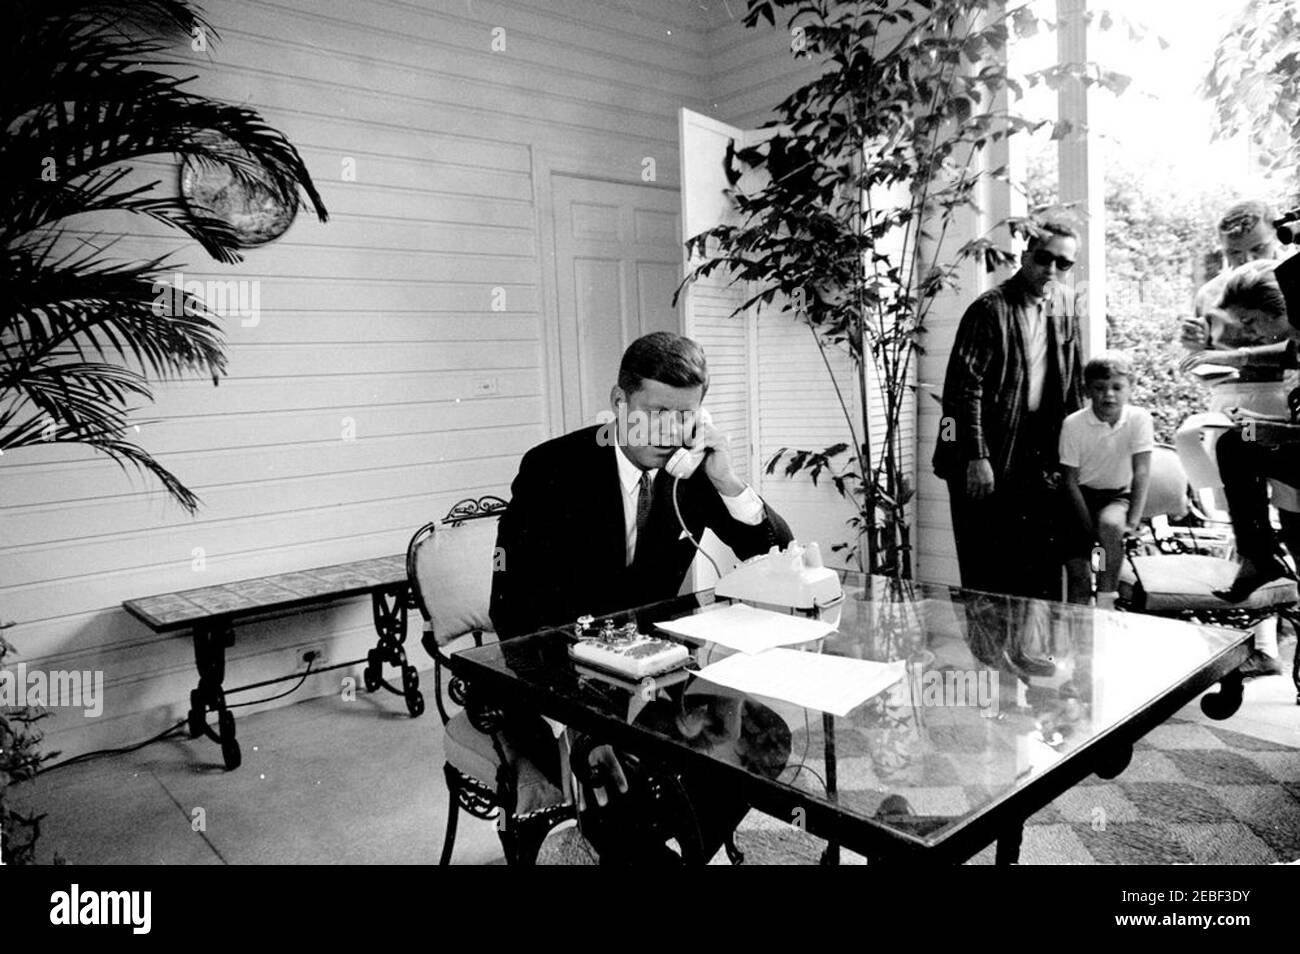 Opening ceremony for the Seattle Worldu0027s Fair from Palm Beach. President John F. Kennedy delivers remarks by telephone before pressing a gold telegraph key (on patio table) to open the 1962 Seattle Worldu0027s Fair (also known as the Century 21 Exposition) via satellite signal from the residence of C. Michael Paul in Palm Beach, Florida. White House Secret Service agent, Clint Hill (wearing sunglasses), stands in background at right; all others are unidentified. Stock Photo